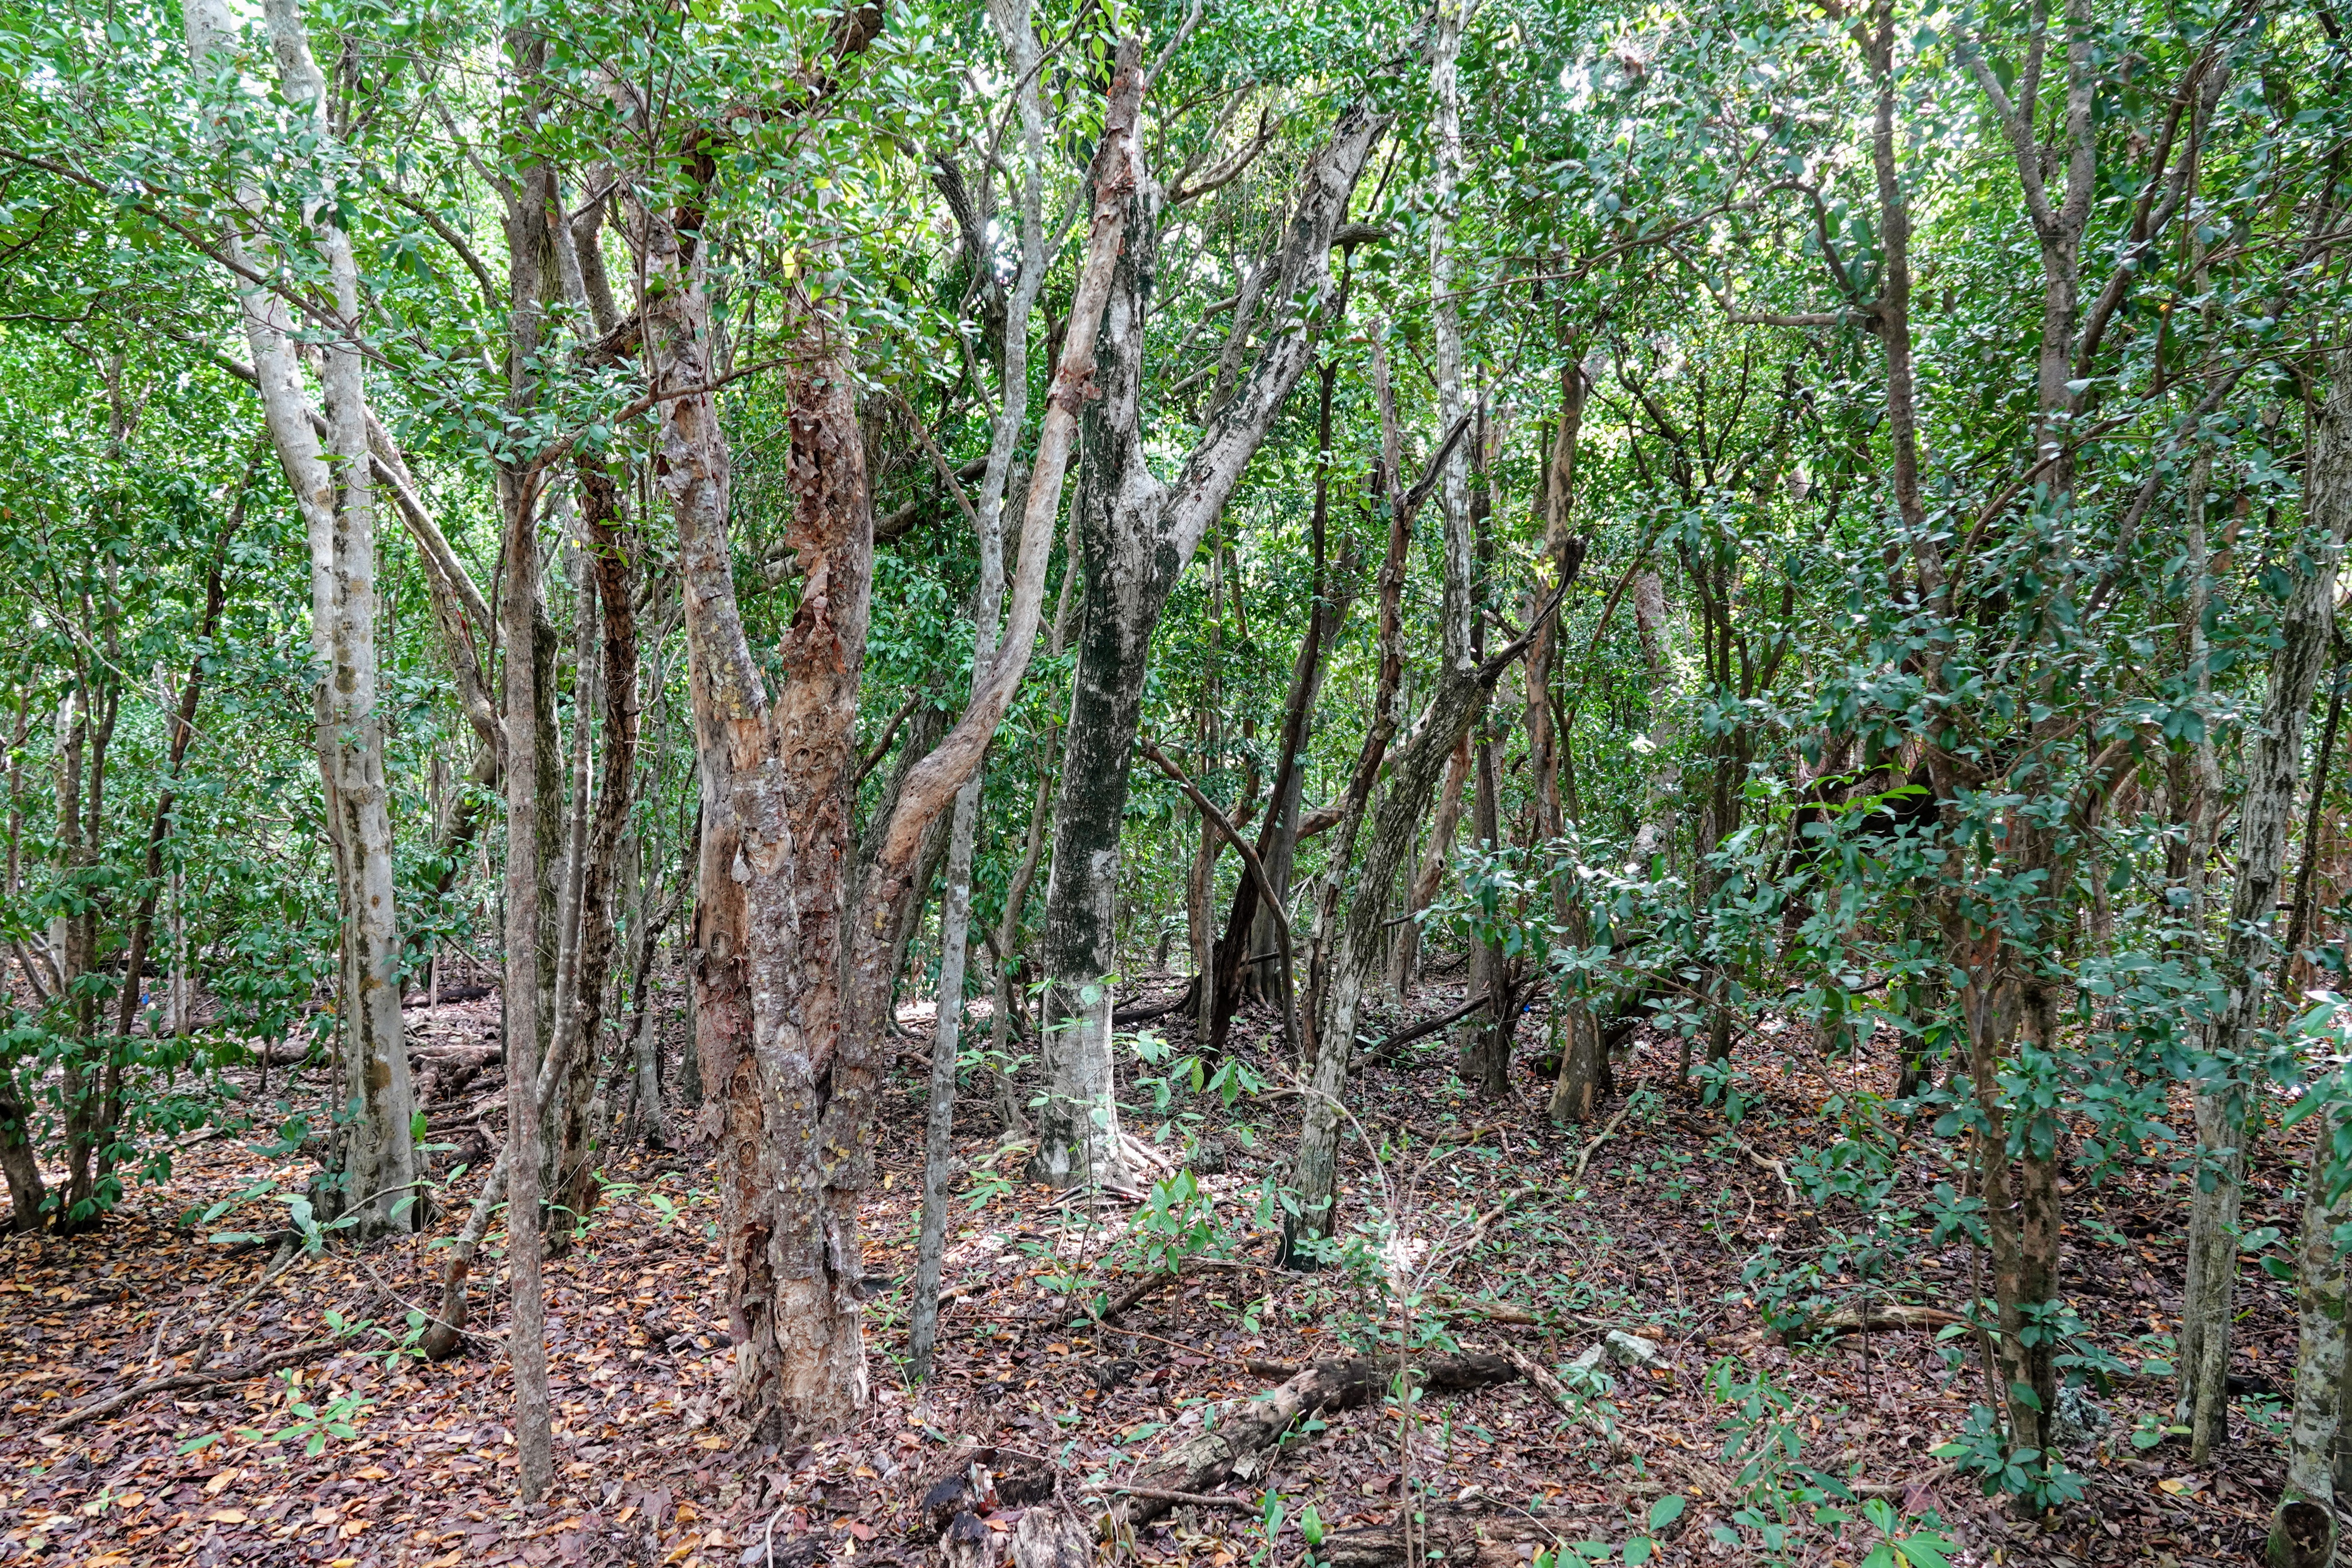 A hammock forest is full of twisting trunks and dense vegetation